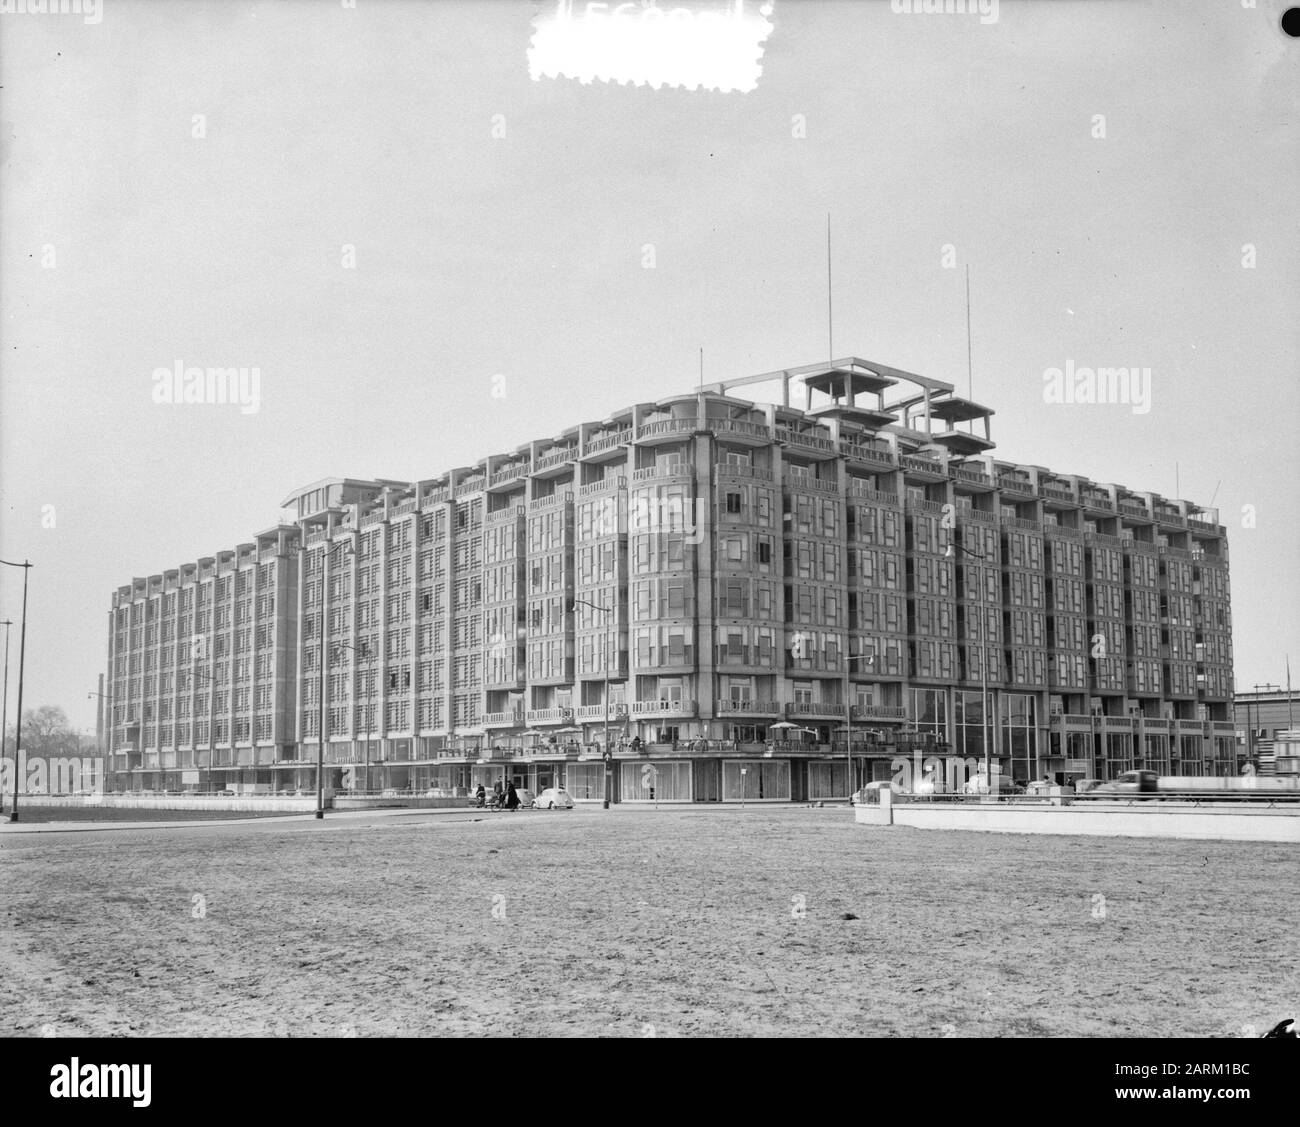 Het Groothandelsgebouw in Rotterdam Annotation: The architects are Huig A. Maaskant and Willem van Tijen Date: March 24, 1953 Location: Rotterdam, Zuid-Holland Keywords: wholesale buildings, office buildings Stock Photo